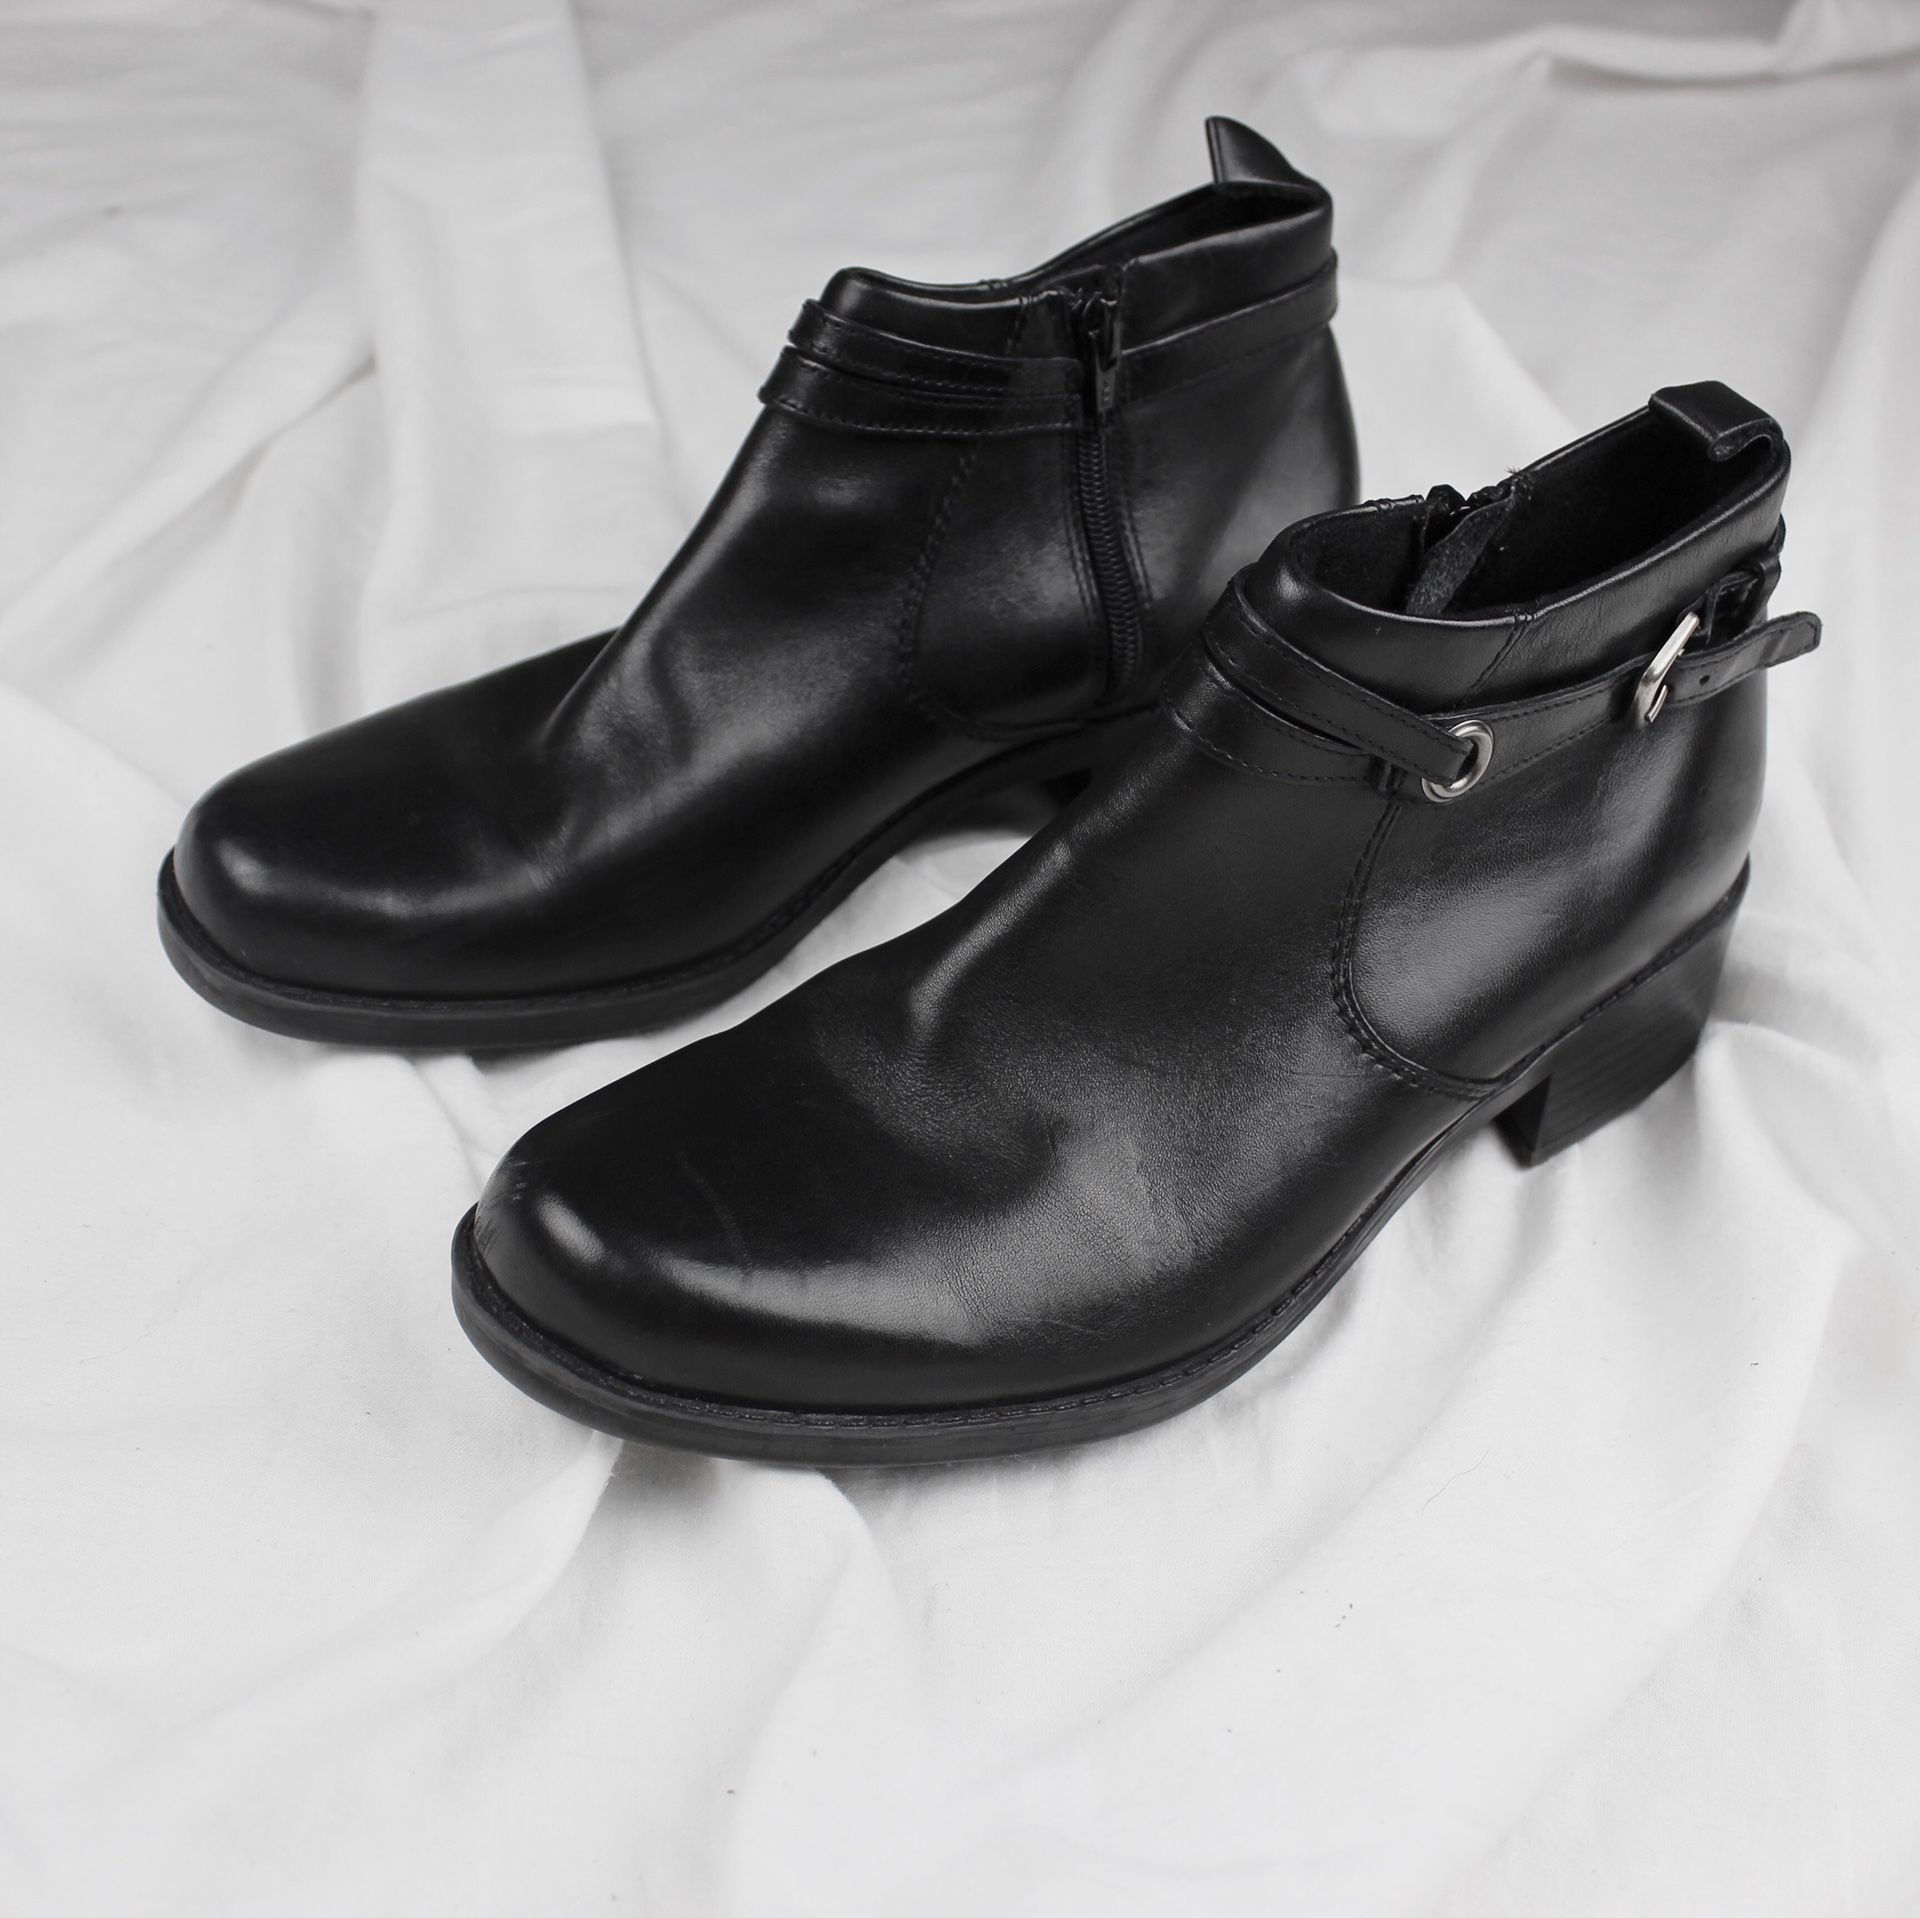 Clark’s Women’s Black Leather Ankle Booties US 8.5